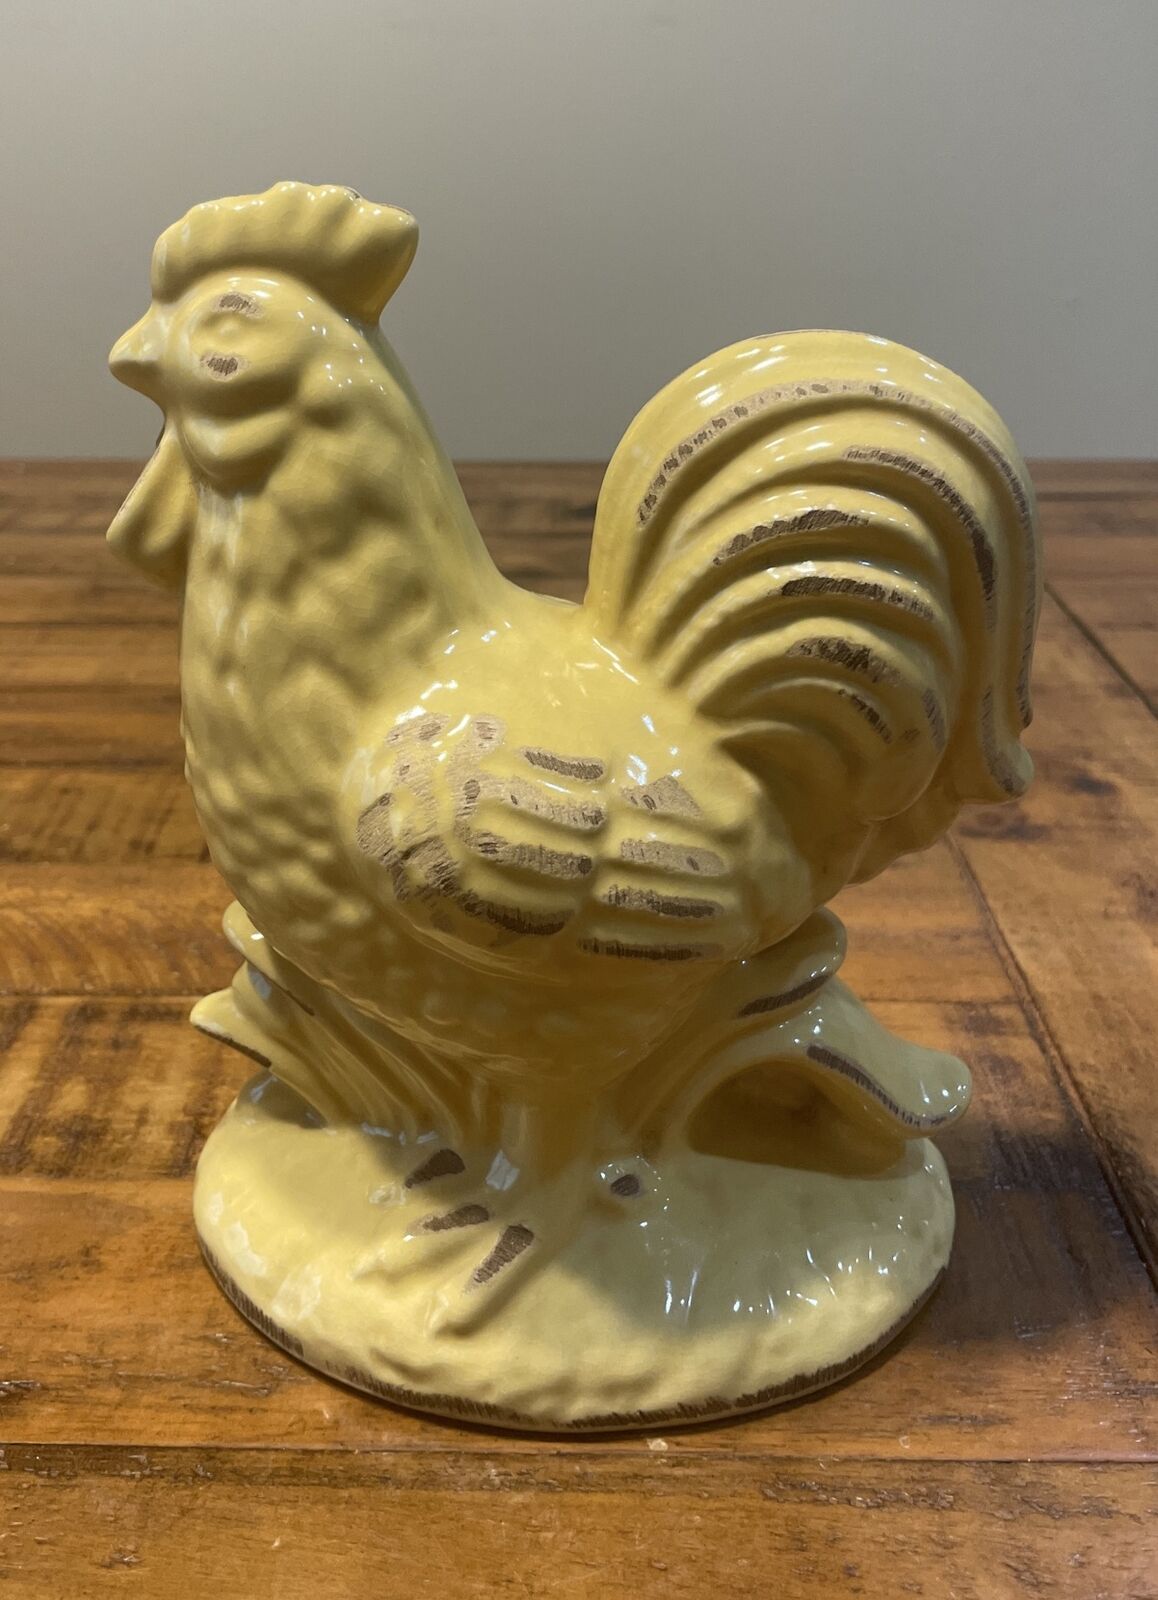 Country Rooster Chicken Ceramic Farm Decorative Figurine. Mint Condition